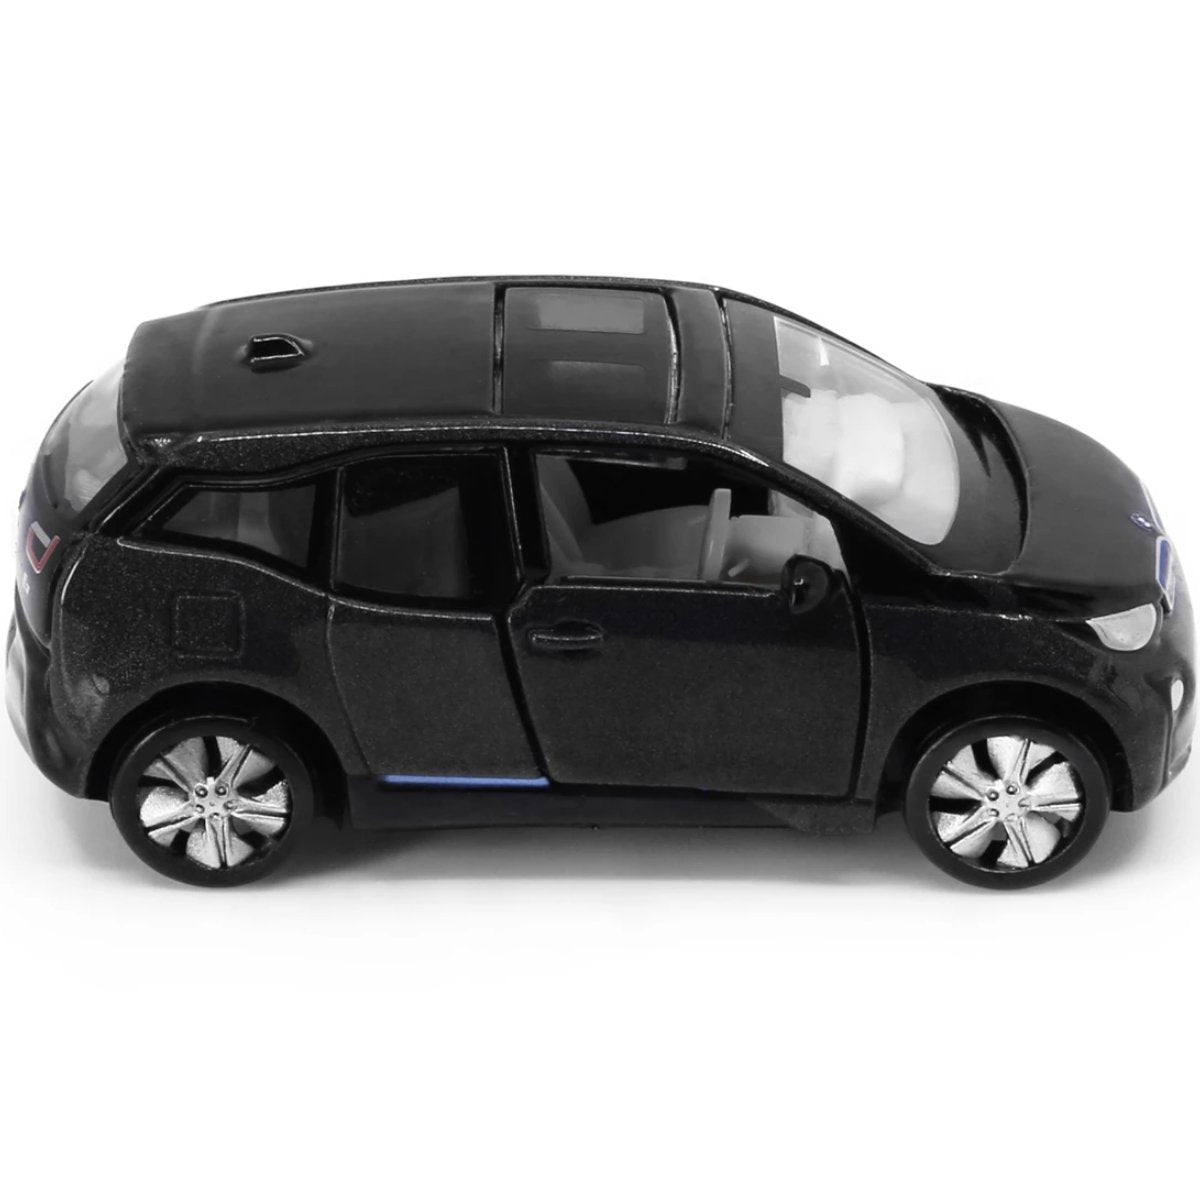 Tiny Models BMW i3 Mineral Grey (1:64 Scale) - Phillips Hobbies